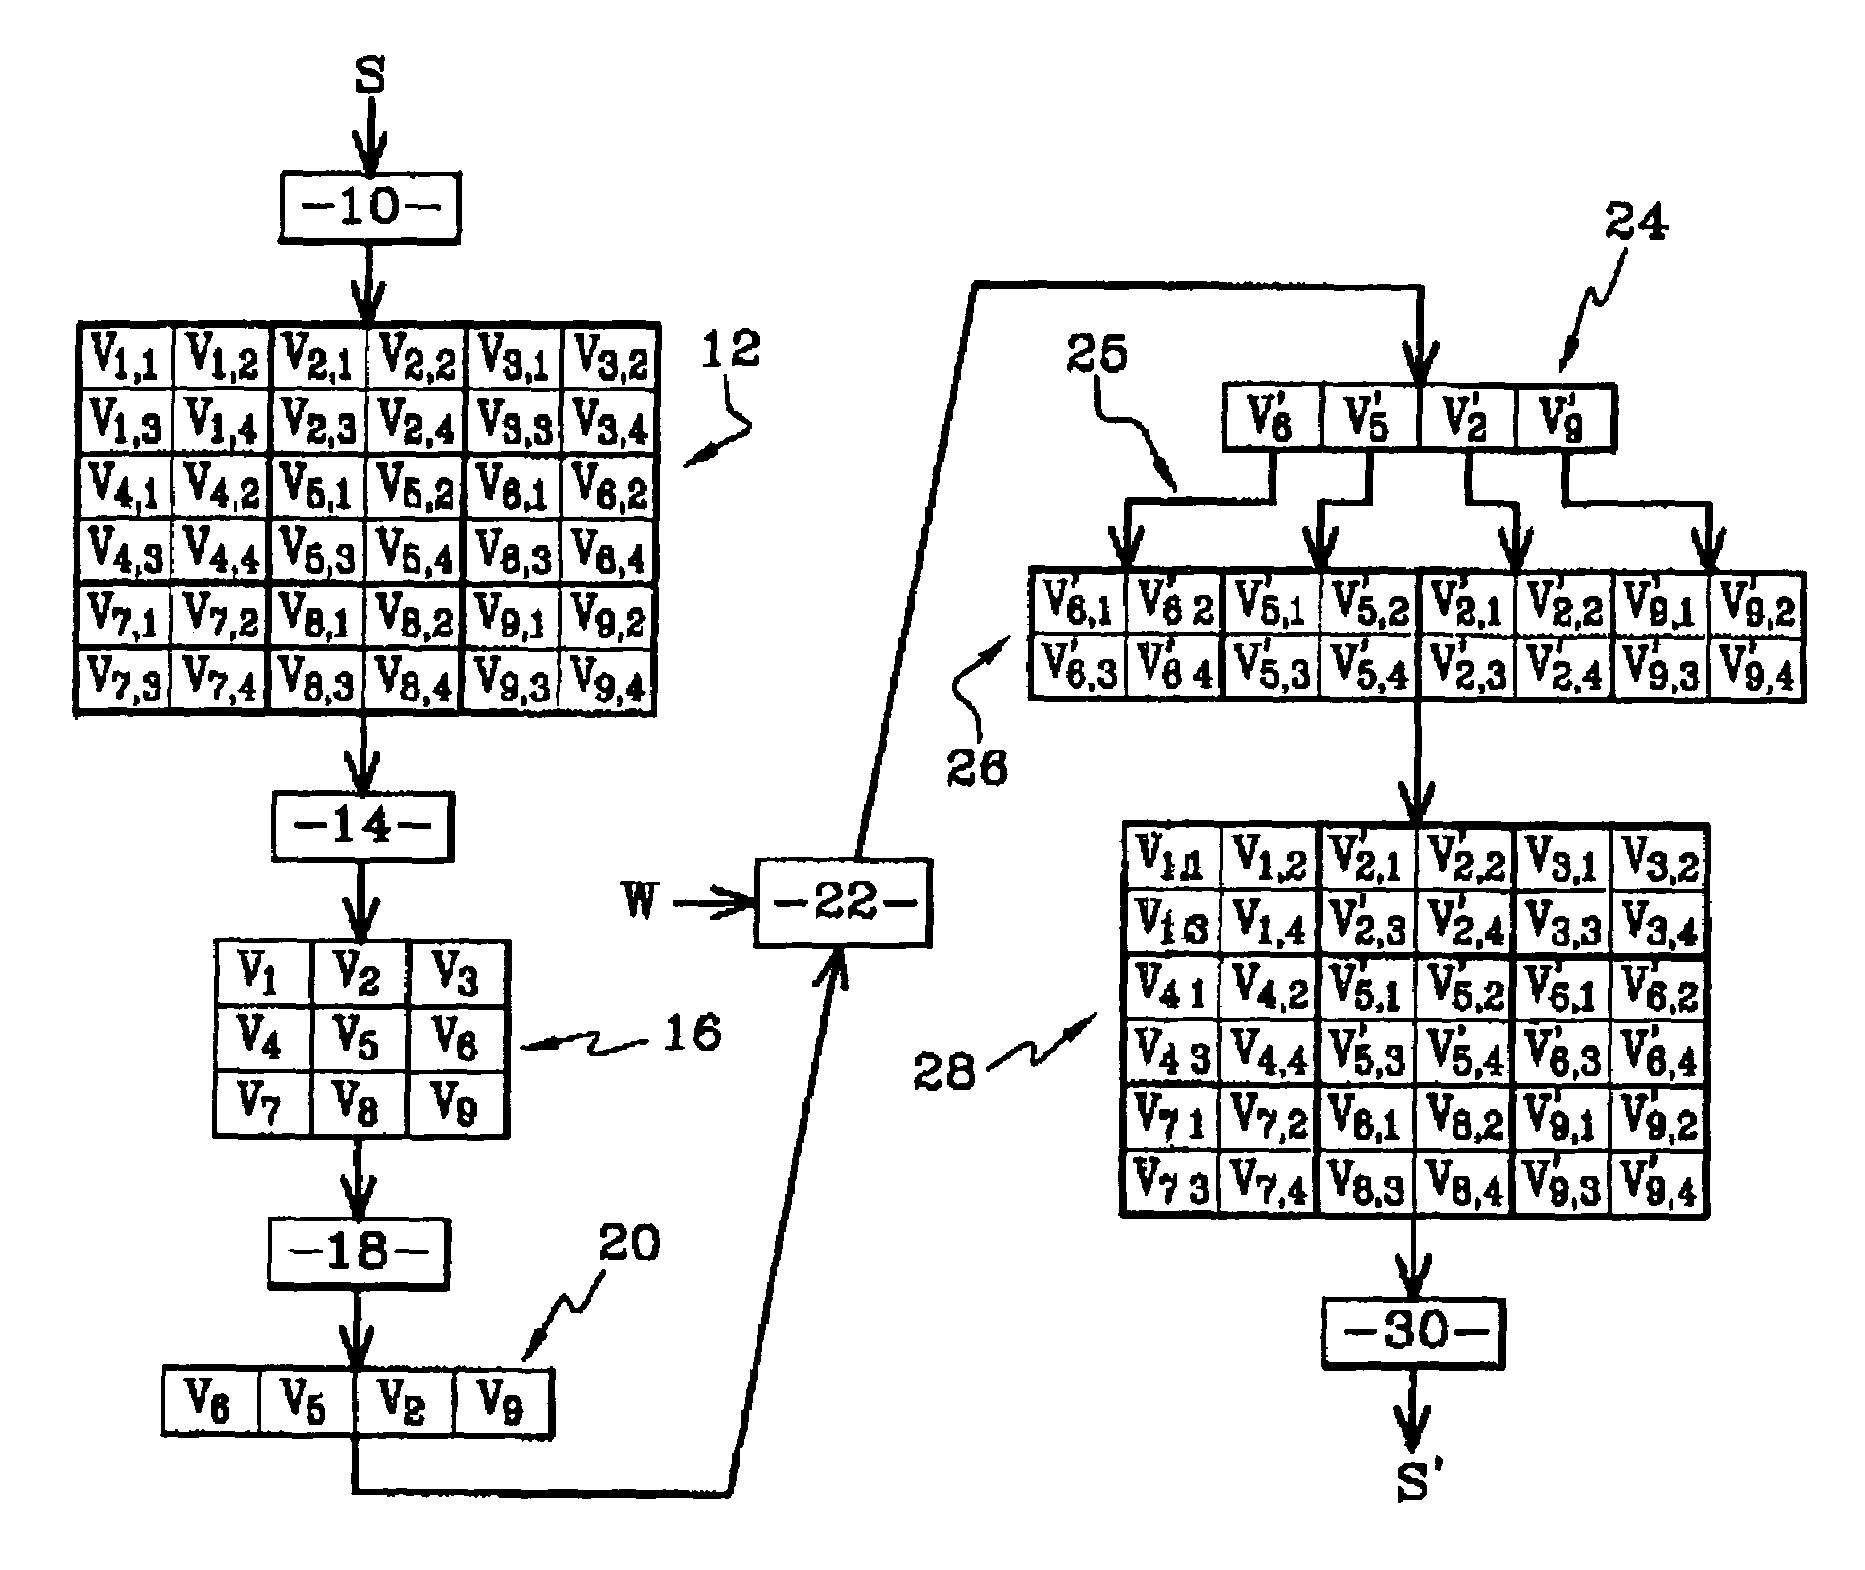 System and method of watermarking a video signal and extracting the watermarking from a video signal